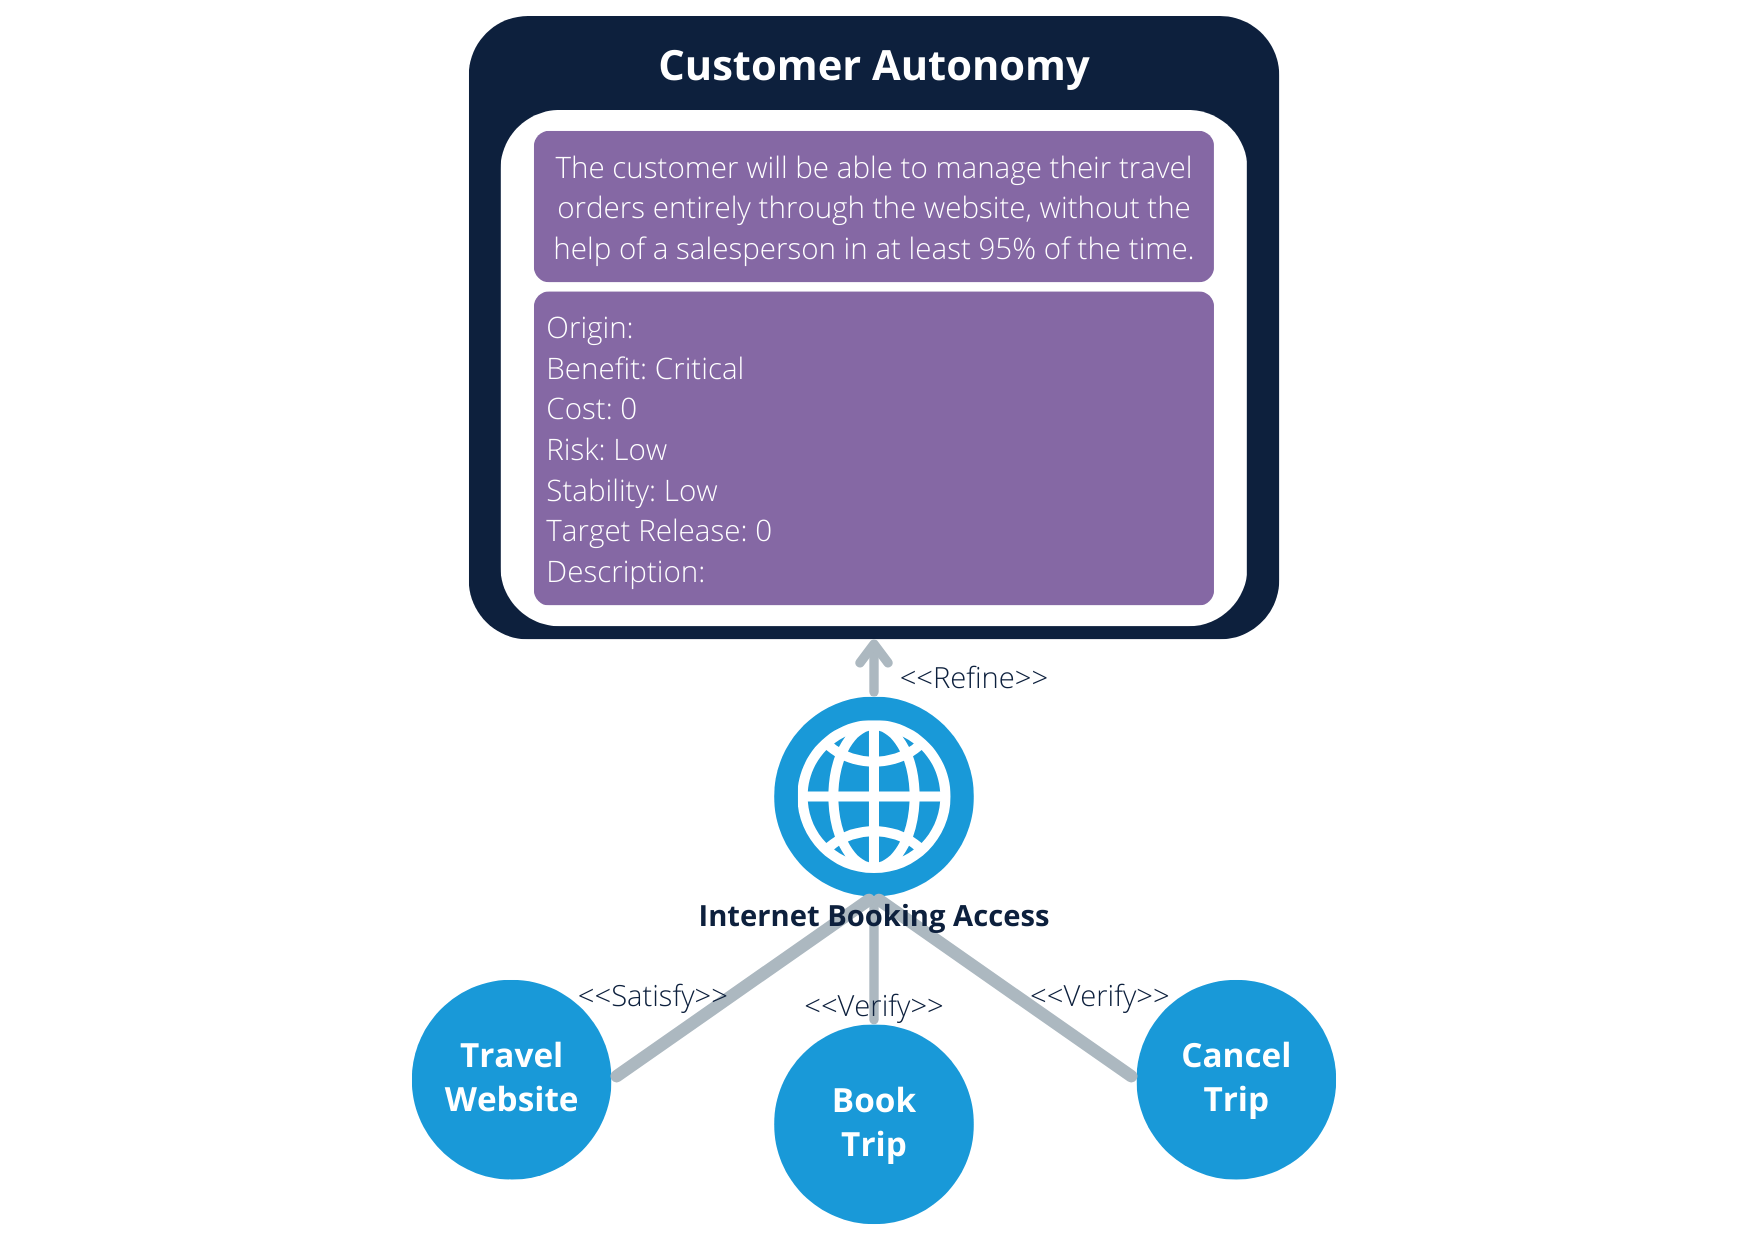 The image is a diagram that appears to be using Unified Modeling Language (UML), which is a standardized modeling language in the field of software engineering. The diagram is designed to specify, visualize, construct, and document the artifacts of a system. In the diagram, there is a central rectangular box with the title "Customer Autonomy." Inside this box, there is a description that reads: "The customer will be able to manage their travel orders entirely through the website, without the help of a salesperson in at least 95% of the times." Below the description, there are several fields: Origin: Benefit: Critical Cost: 0 Risk: Low Stability: Low Target Release: 0 Description: Connected to this central box are three circles, representing different components of the system: "Travel Website" to the left, which is connected with a line labeled "", suggesting that the travel website needs to satisfy the customer autonomy requirement. "Book Trip" at the bottom, connected with lines labeled "" pointing to and from the "Internet Booking Access" globe icon. This indicates that the ability to book a trip is a feature that needs to be verified against the internet booking access. "Cancel Trip" to the right, connected with a line labeled "", indicating that the ability to cancel a trip is another feature that needs to be verified against the internet booking access. In the center, there is a globe icon labeled "Internet Booking Access" with lines labeled "" pointing to the "Customer Autonomy" box. This implies that internet booking access refines or is a detailed part of the customer autonomy requirement. This type of diagram is typically used to analyze and document the requirements and functionalities of a system, in this case, likely a travel booking system. It helps stakeholders understand the system's structure and behavior.